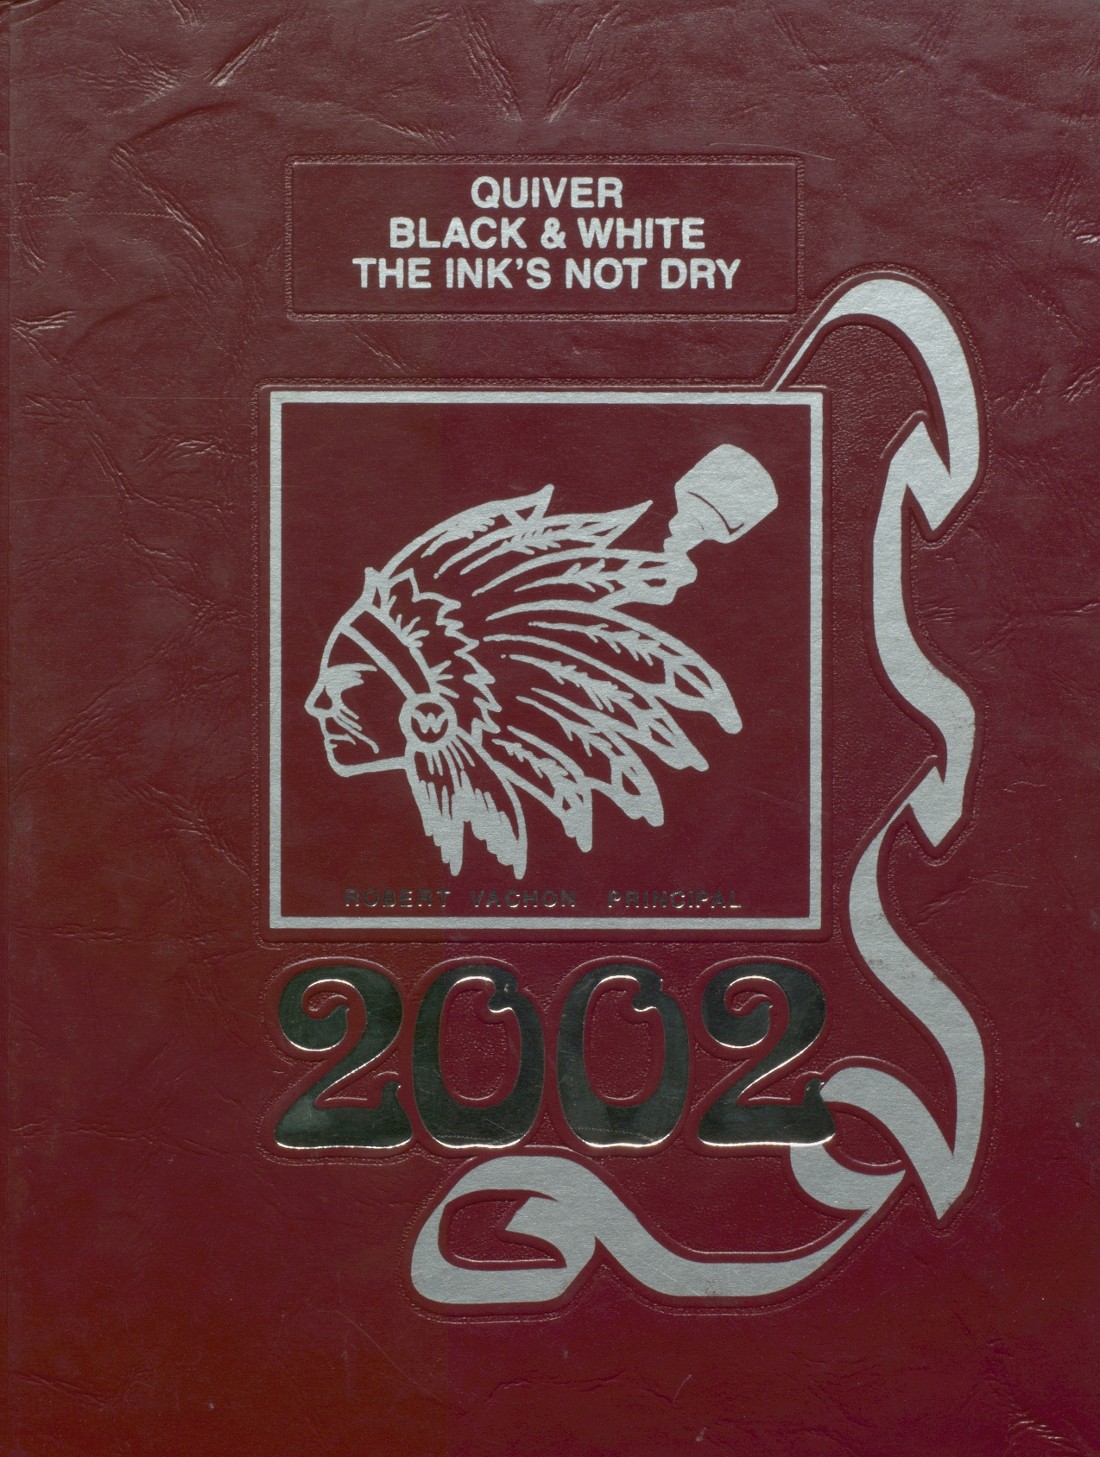 2002 yearbook from Woonsocket High School from Woonsocket, Rhode Island